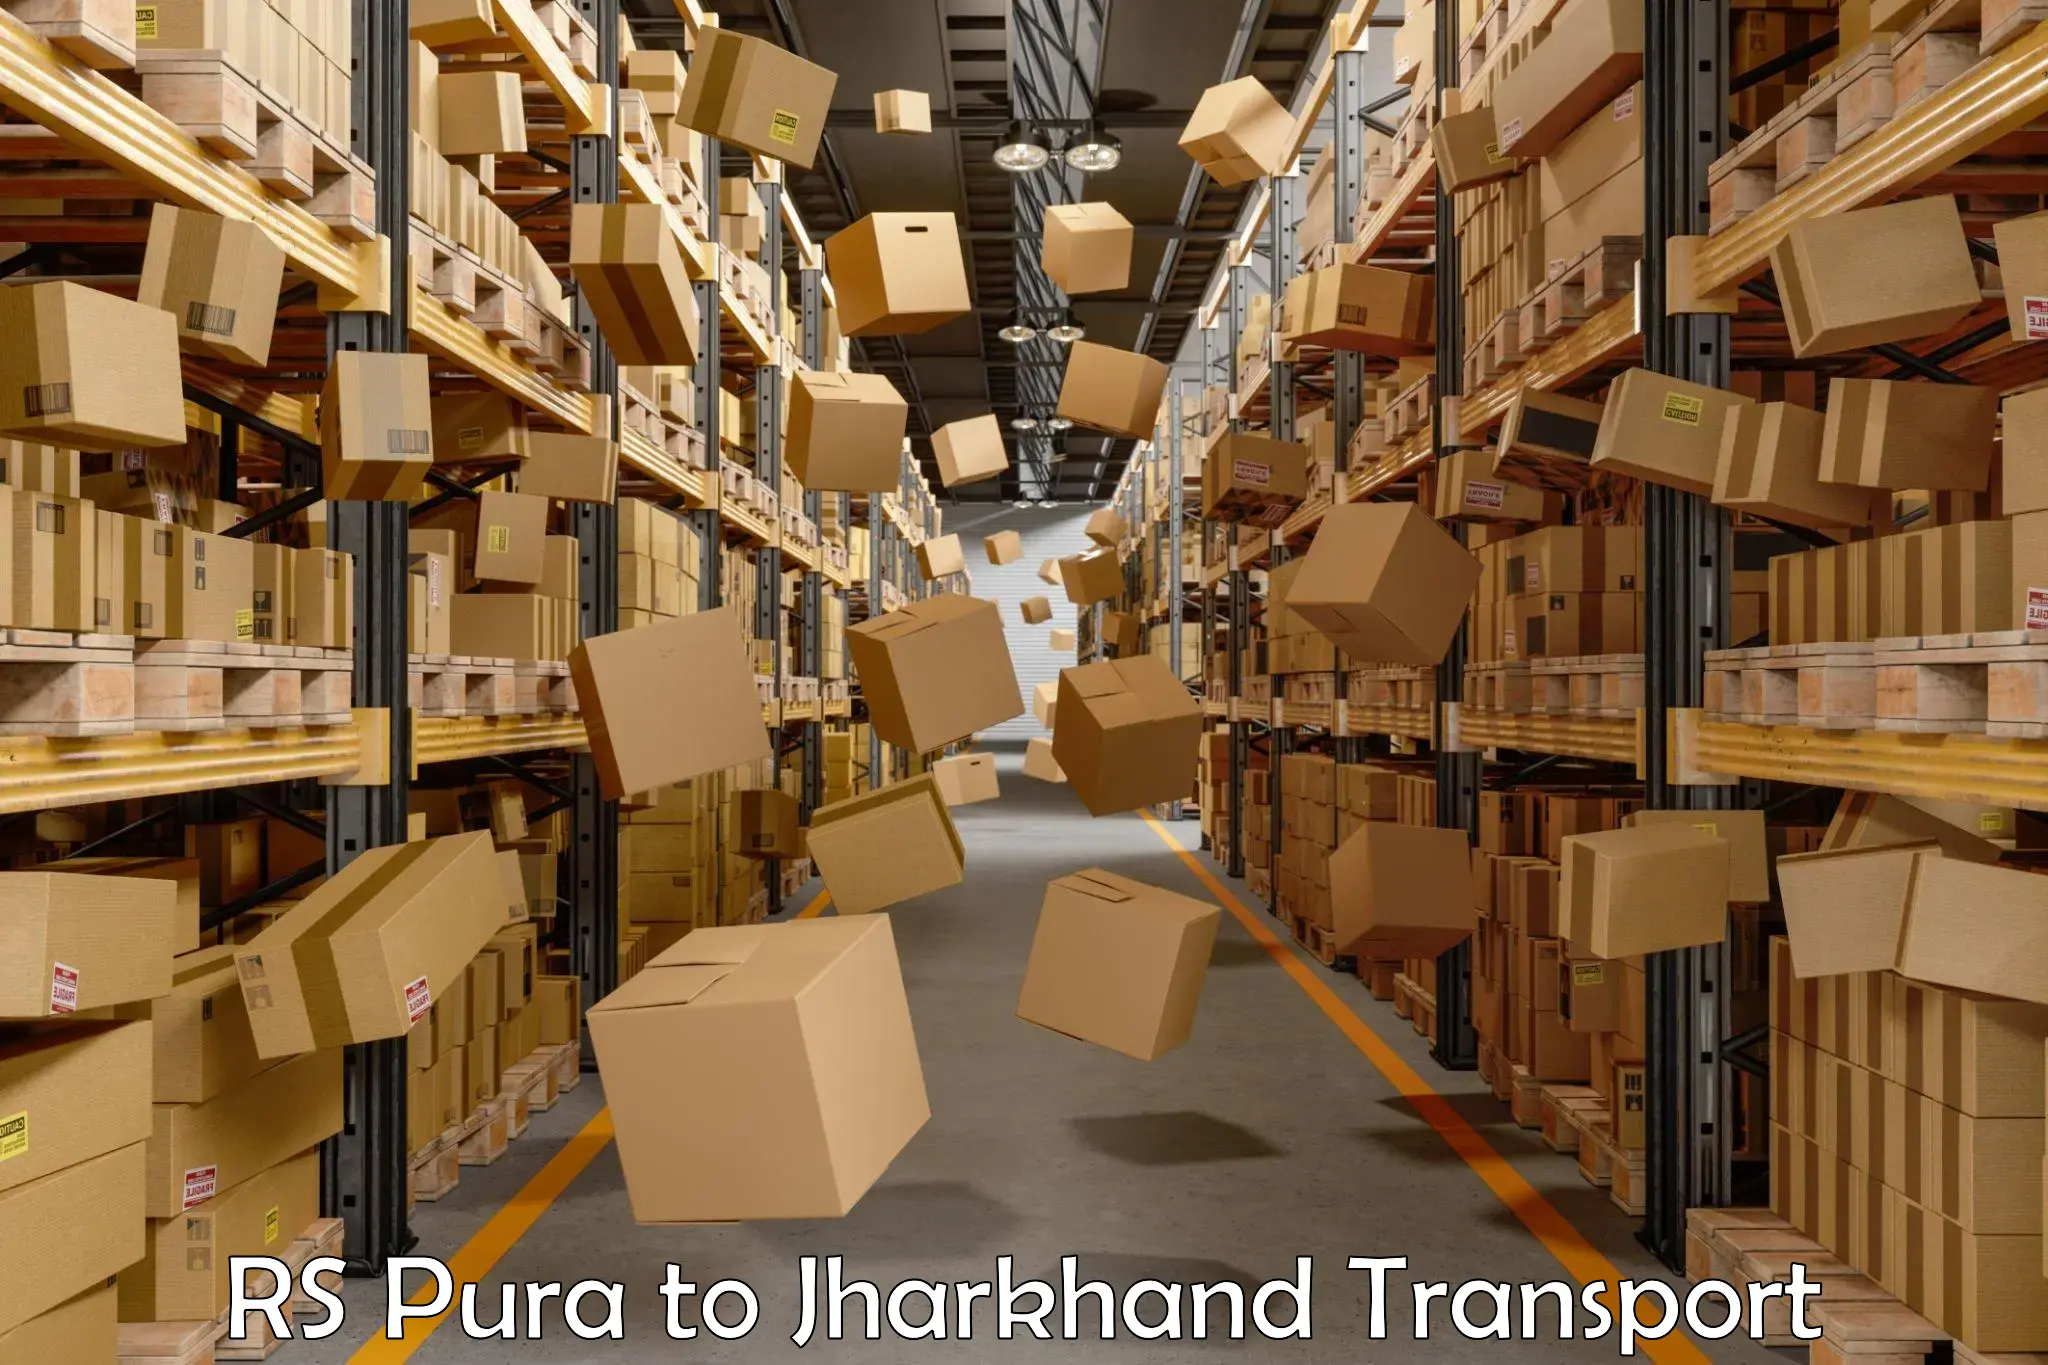 Transport in sharing RS Pura to Jharkhand